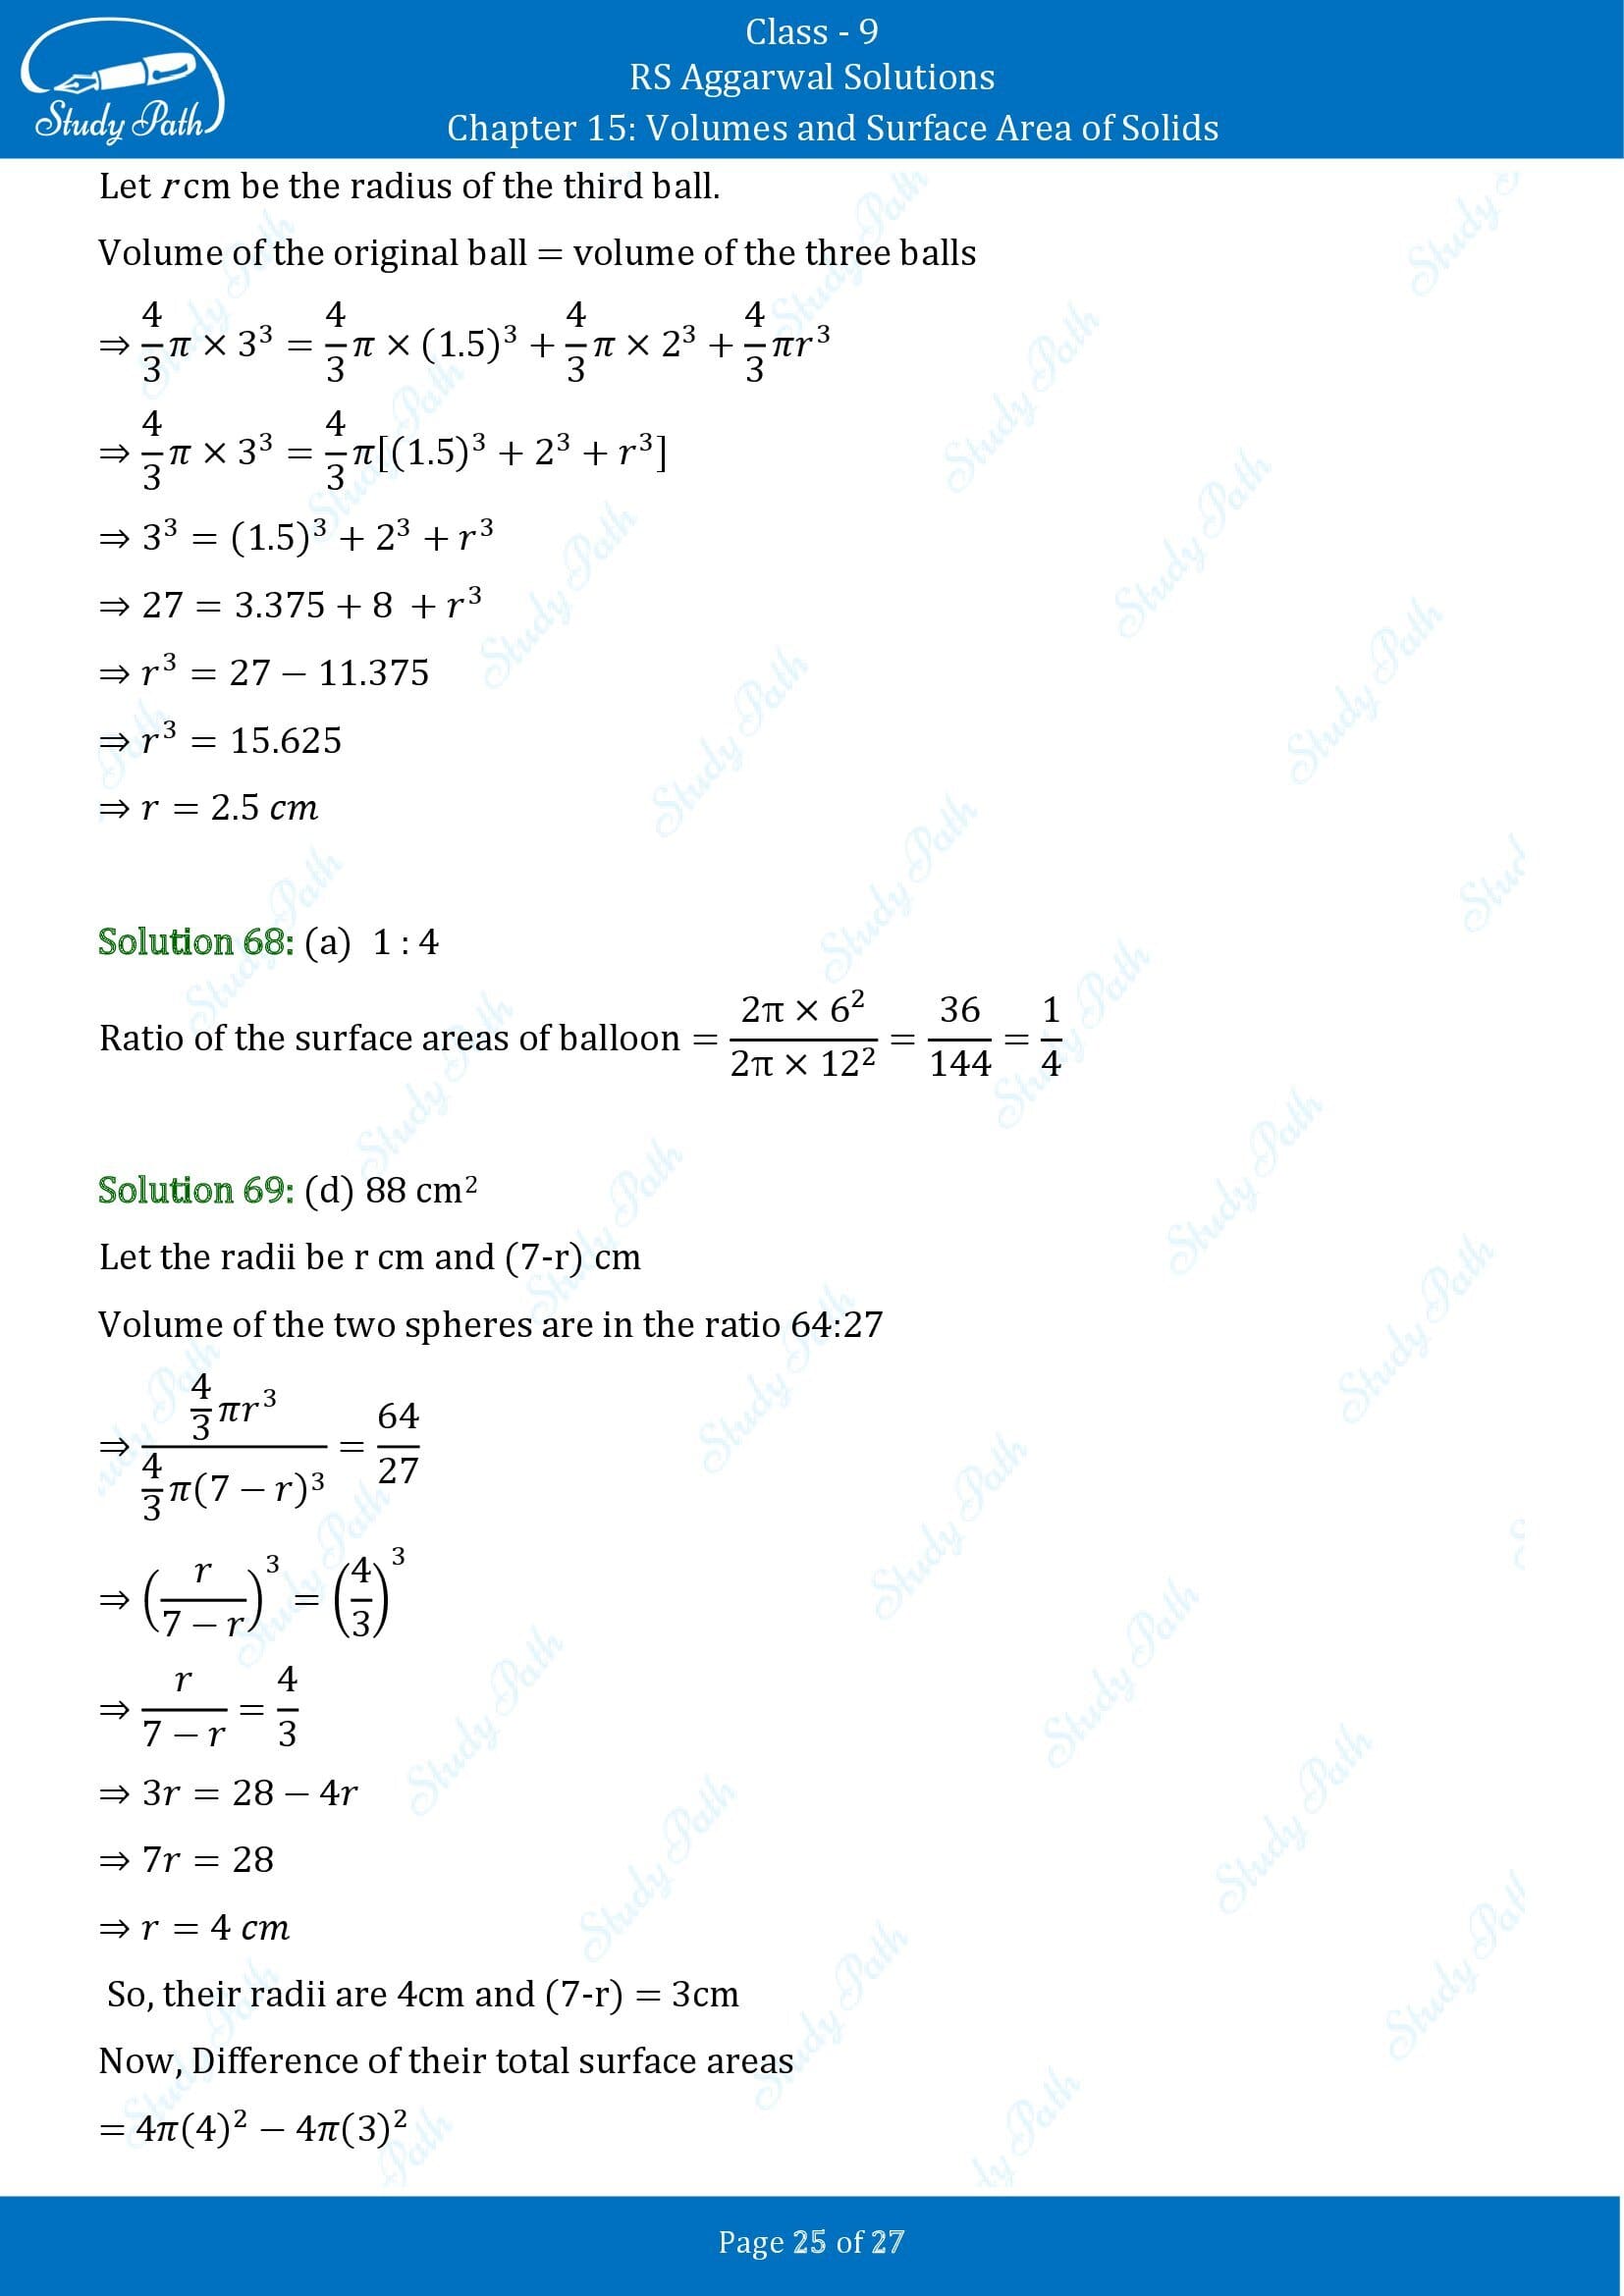 RS Aggarwal Solutions Class 9 Chapter 15 Volumes and Surface Area of Solids Multiple Choice Questions MCQs 00025